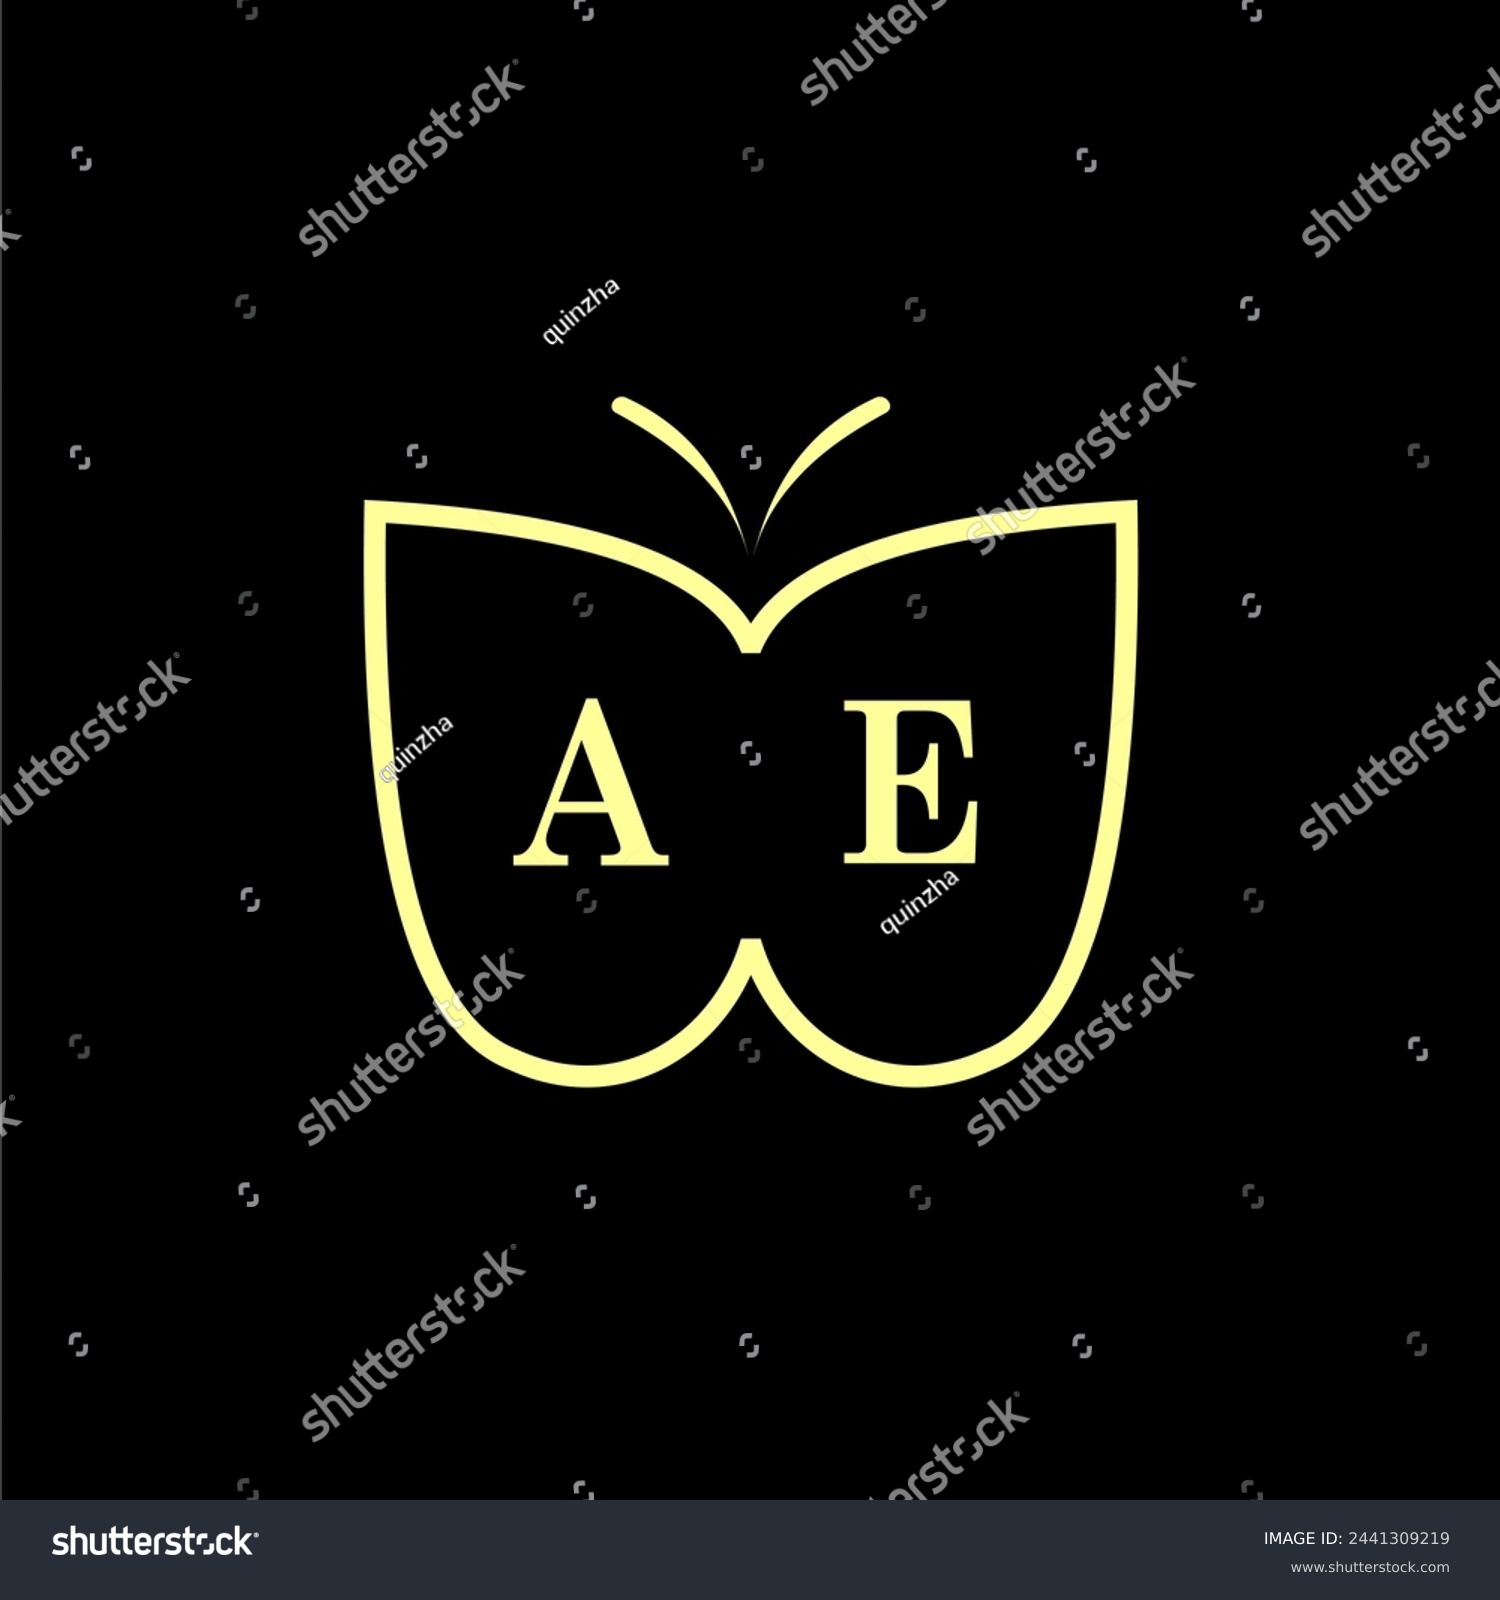 SVG of AE Initials Luxury Butterfly logo Vector illustration svg